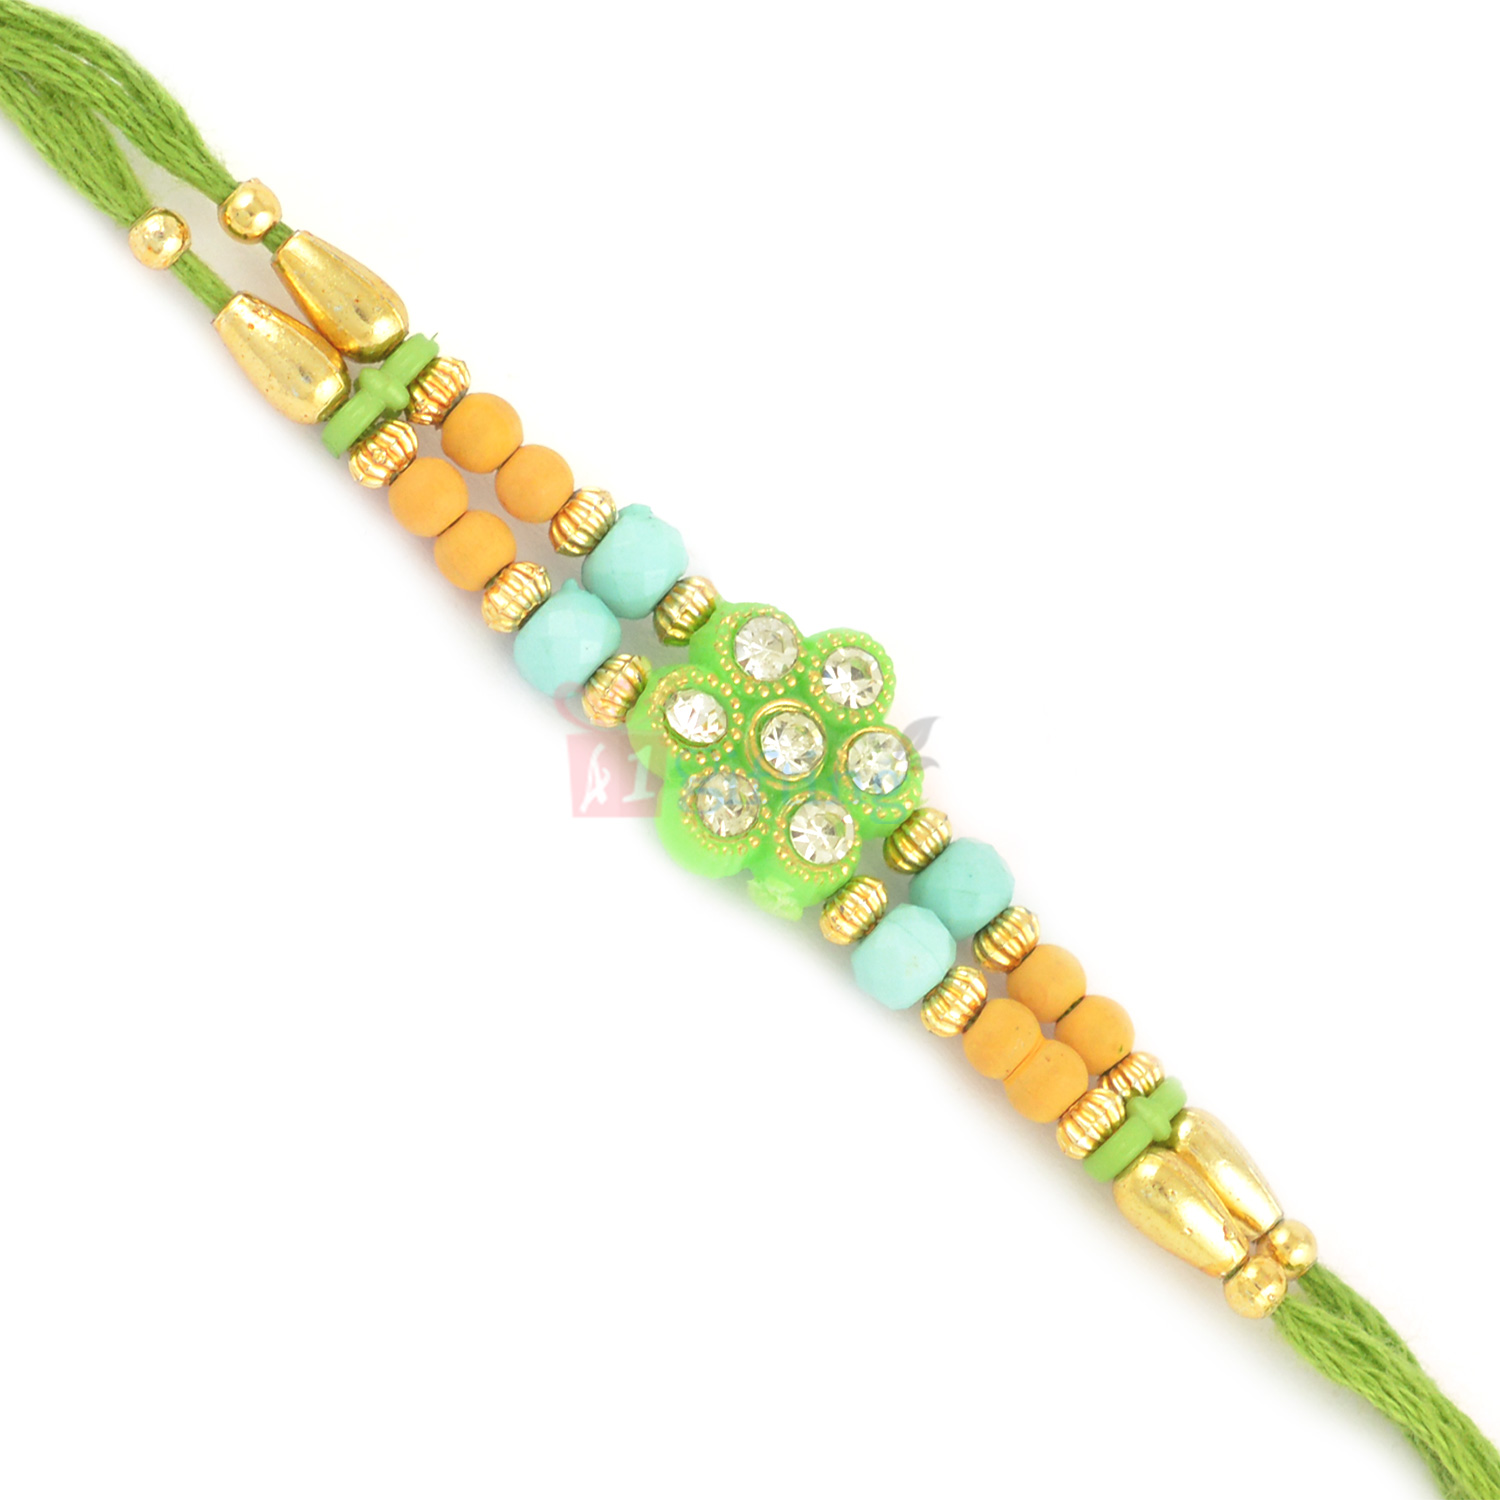 Colorful Beads and Jewel Floral Pattern Rakhi